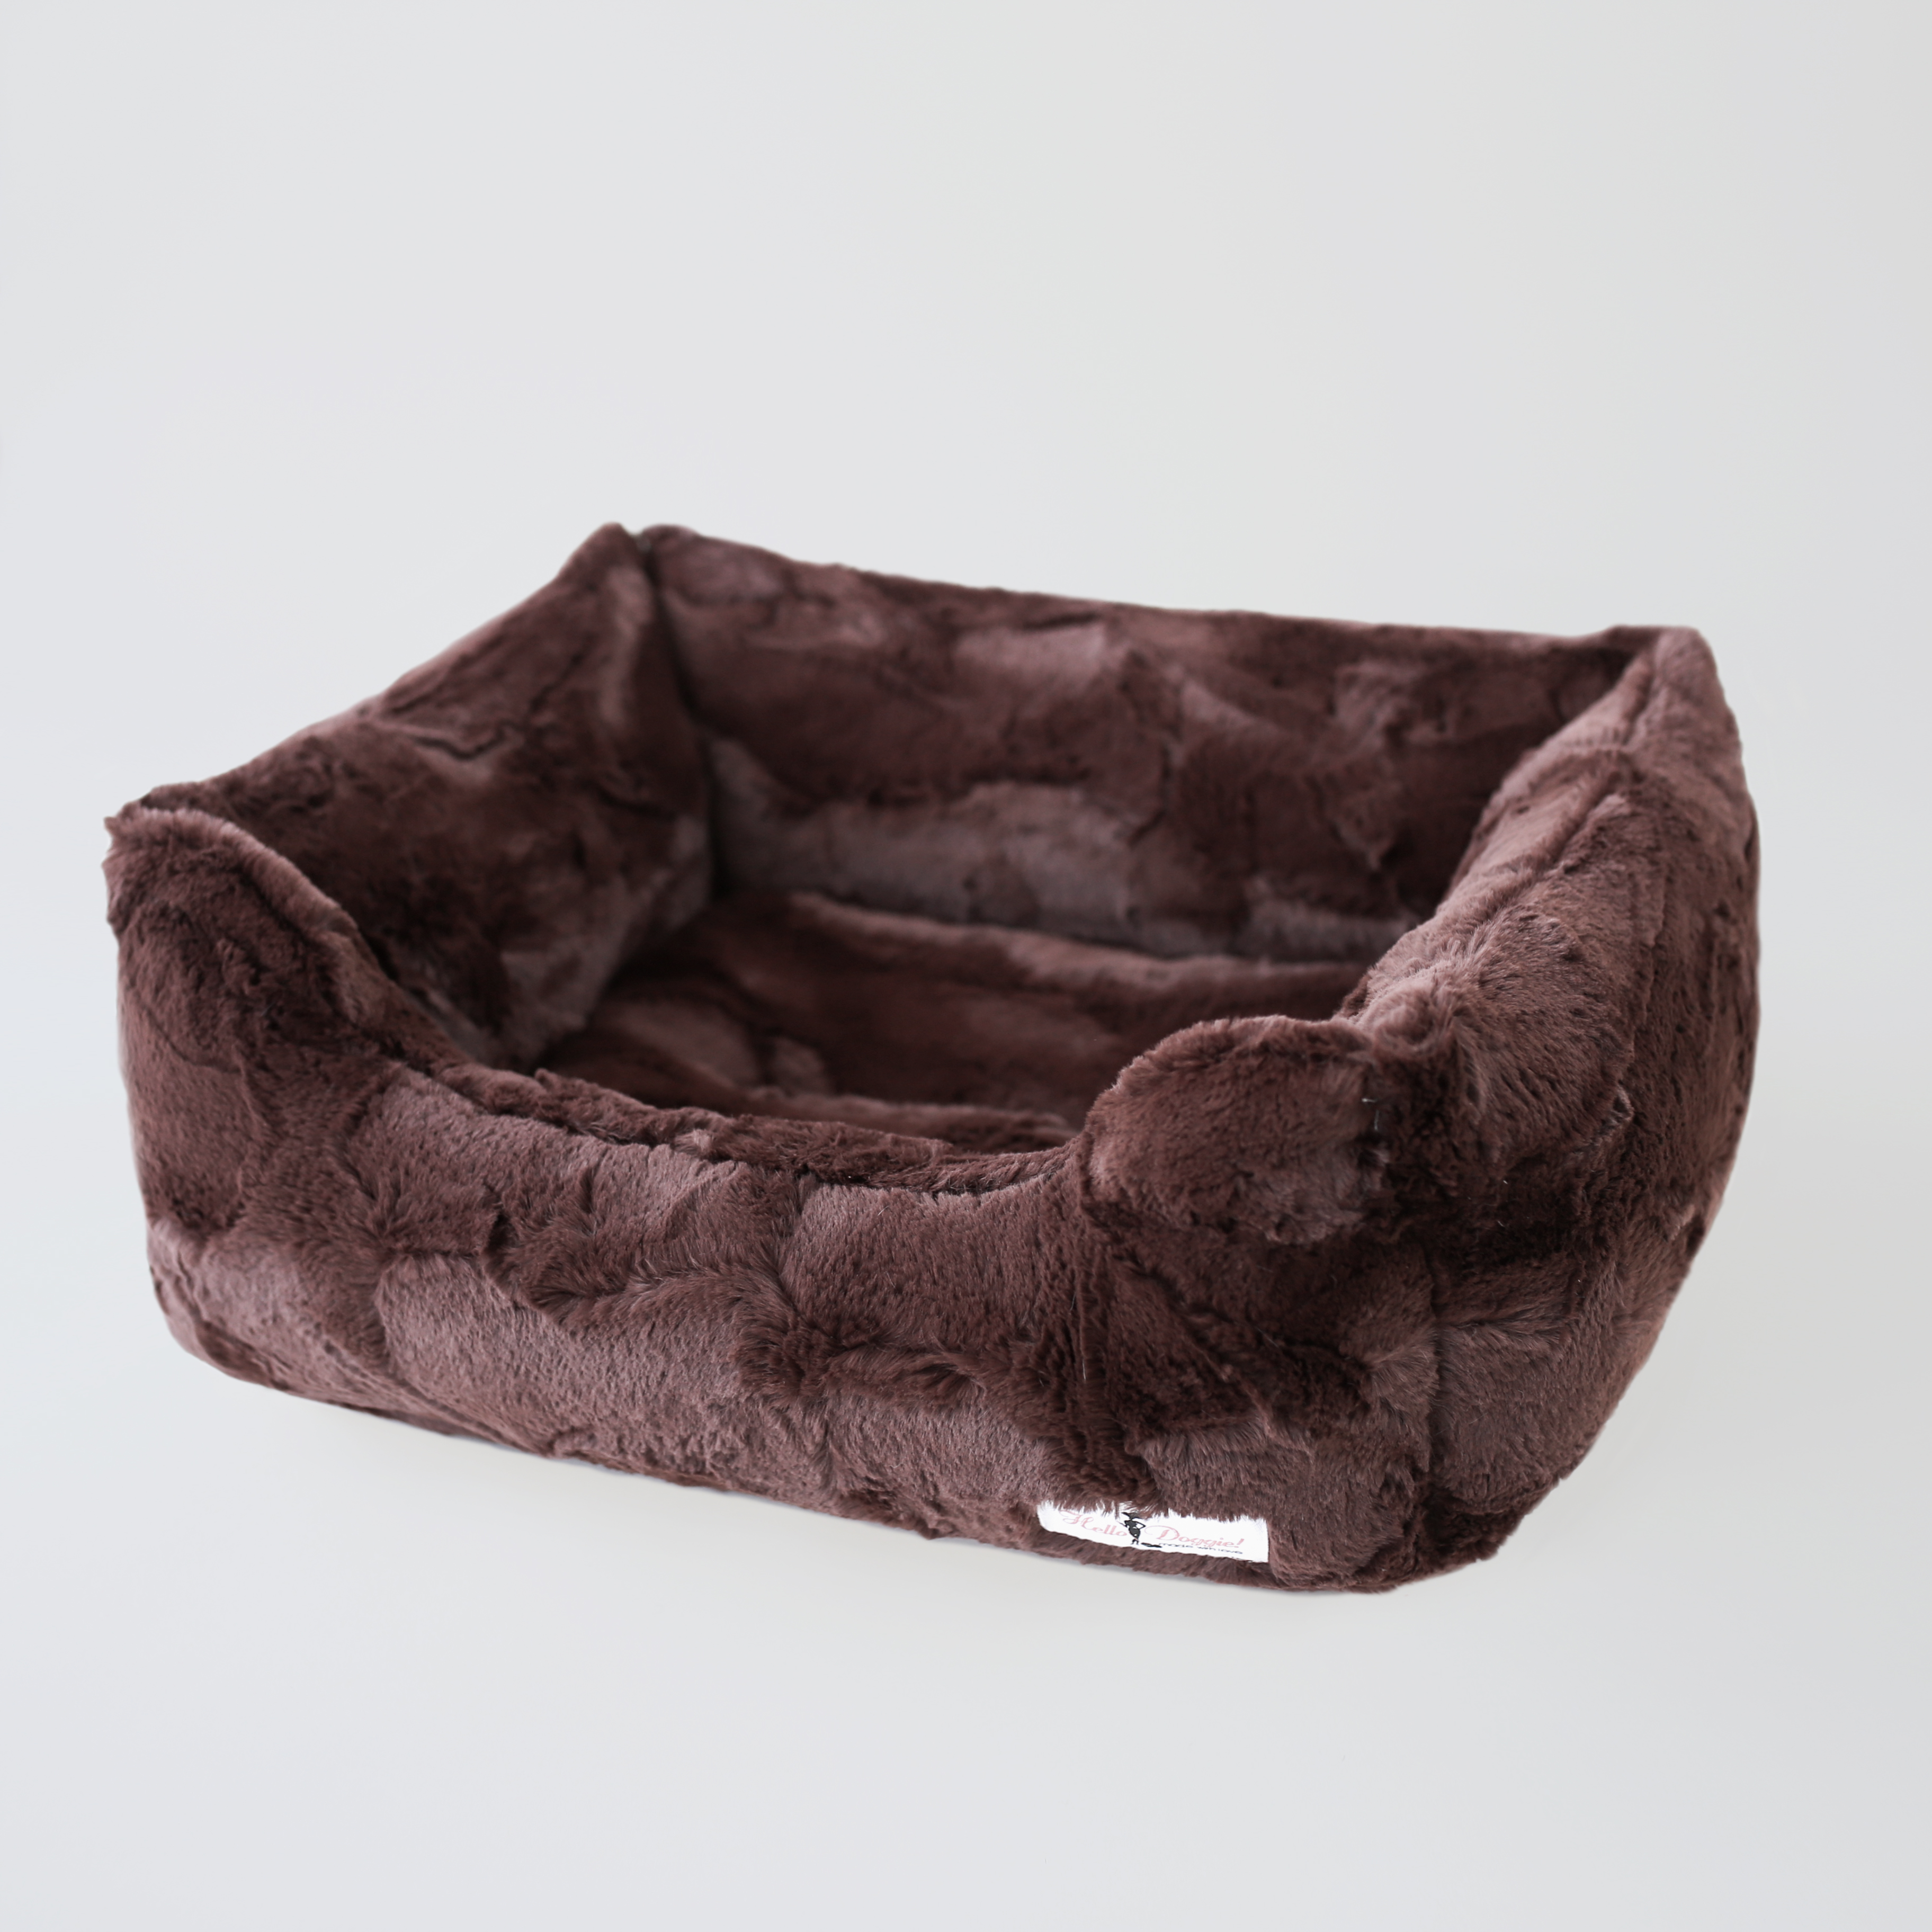 Pet Boutique - Designer Dog Beds - Chocolate Luxe Luxury Dog Bed by Hello Doggie